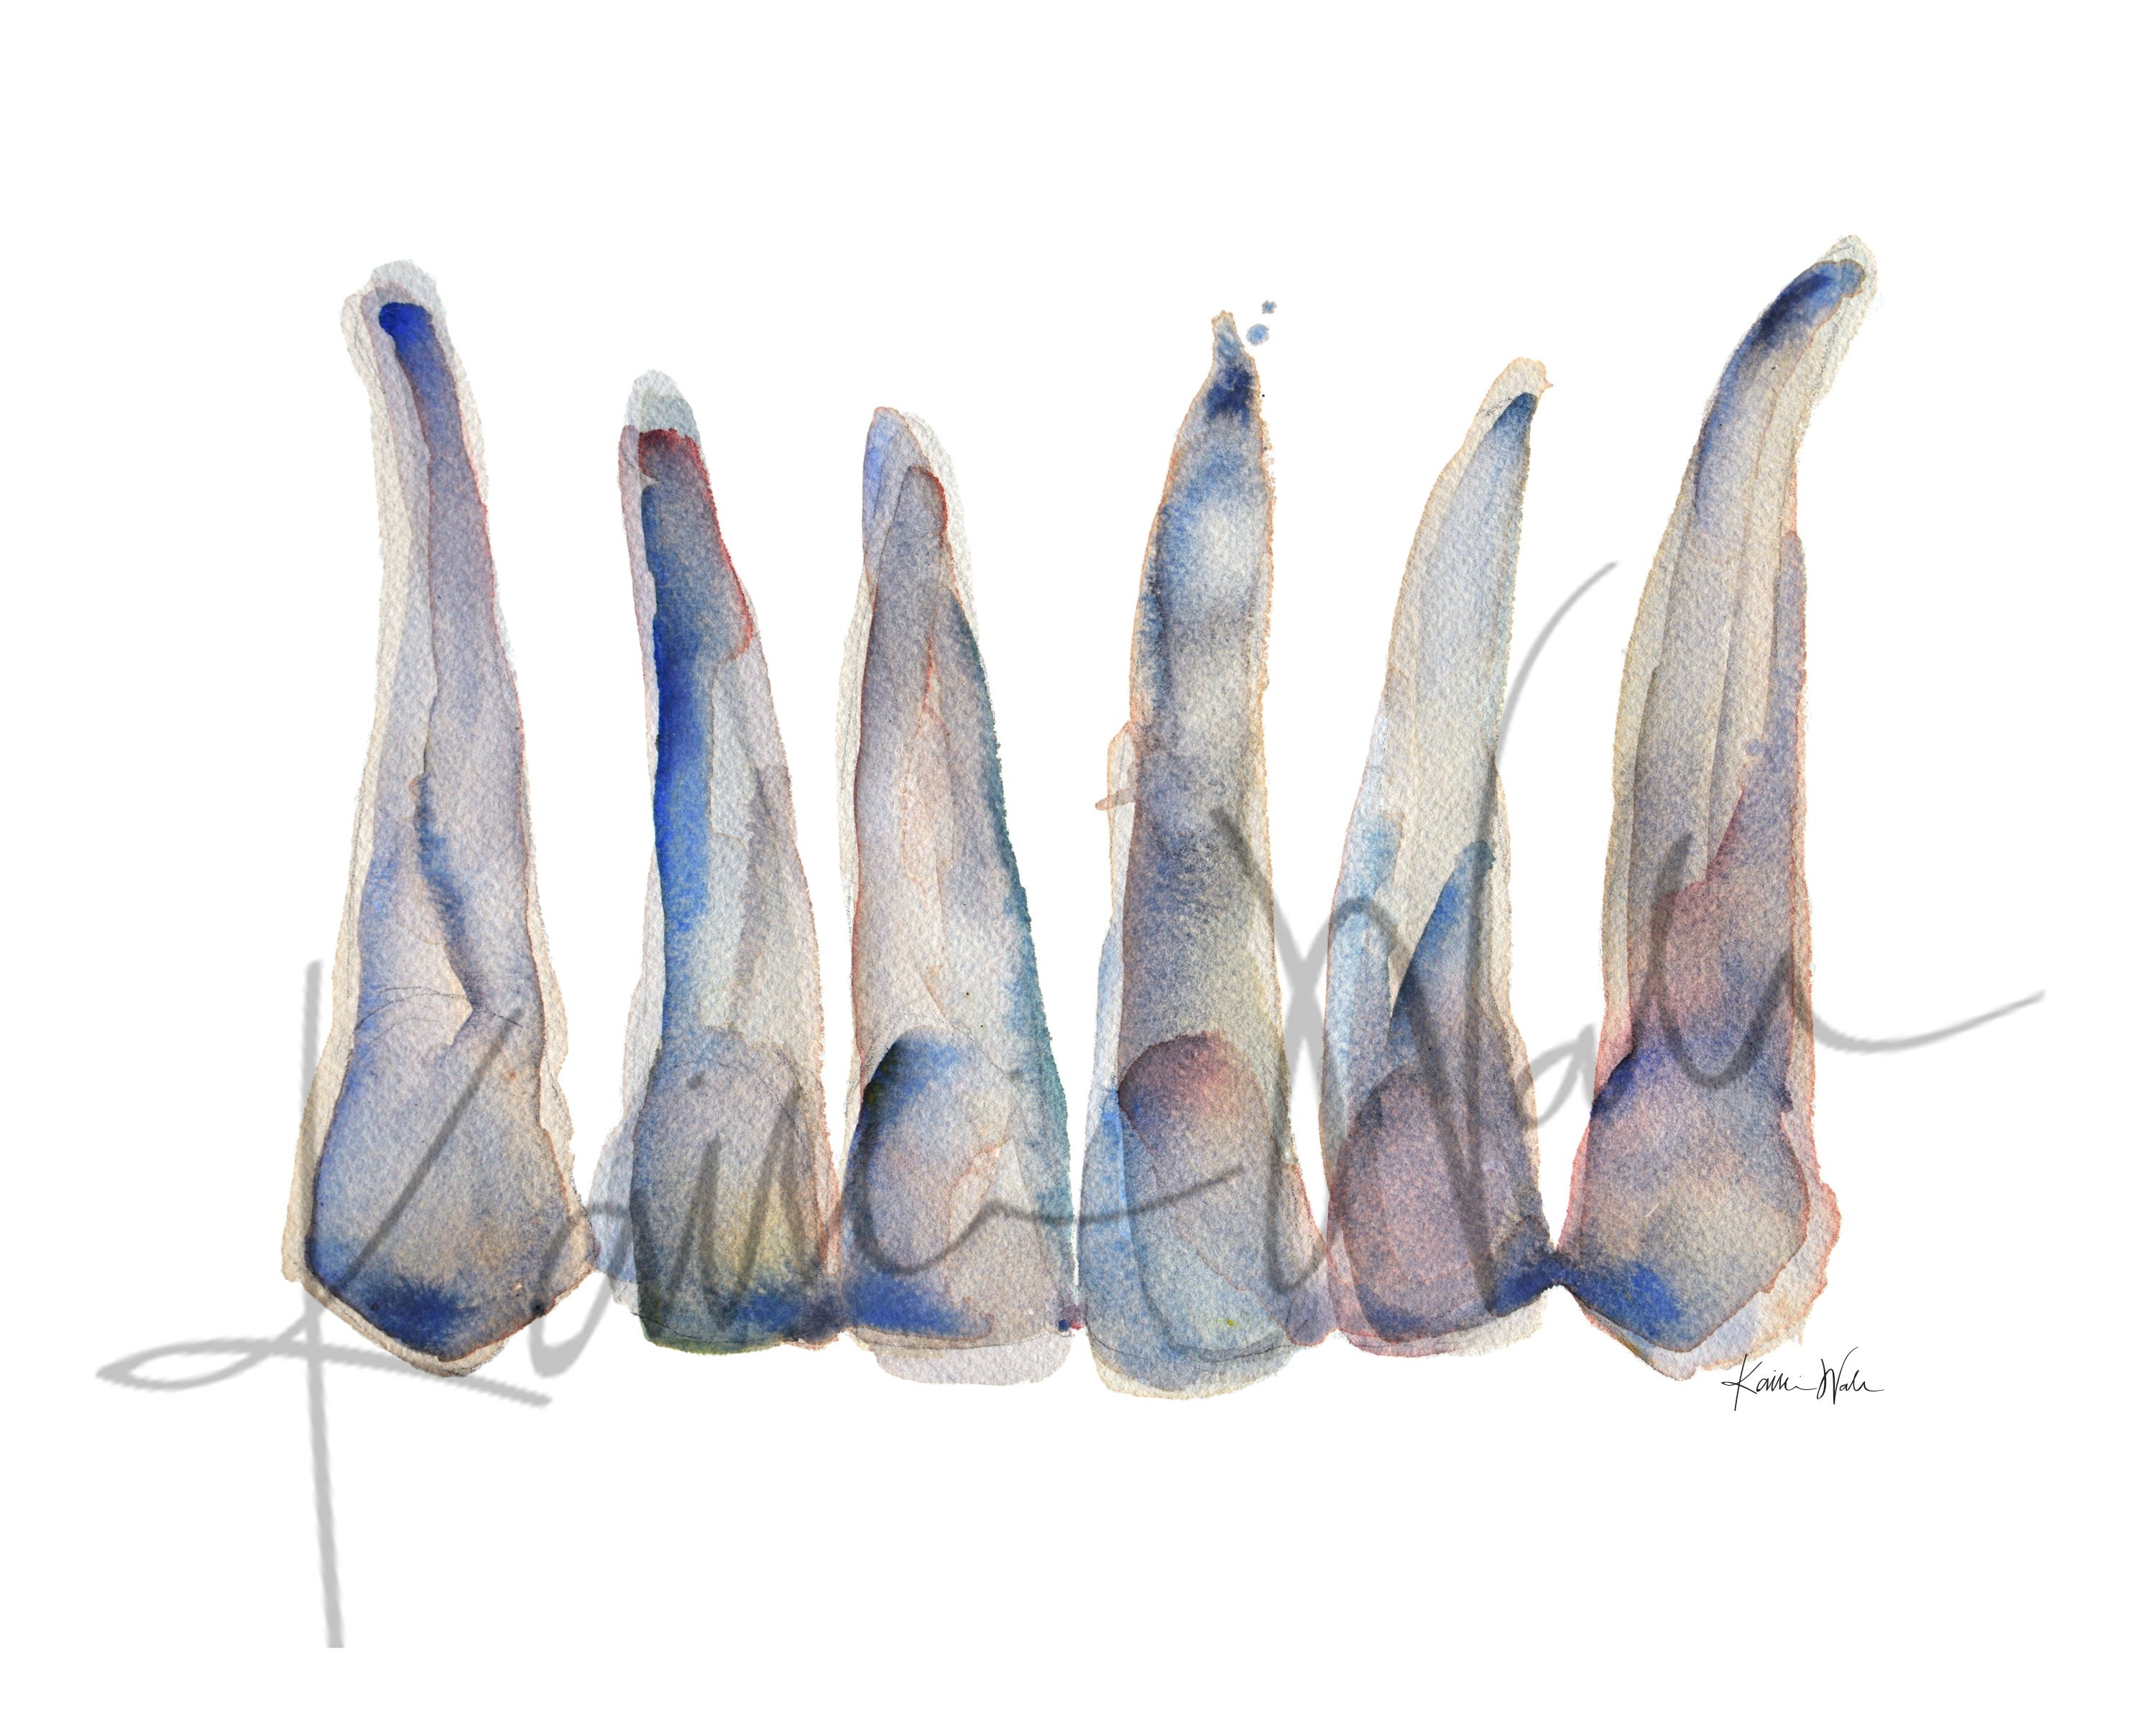 Unframed watercolor painting of maxillary incisors in blue, gray and soft, subtle reds.